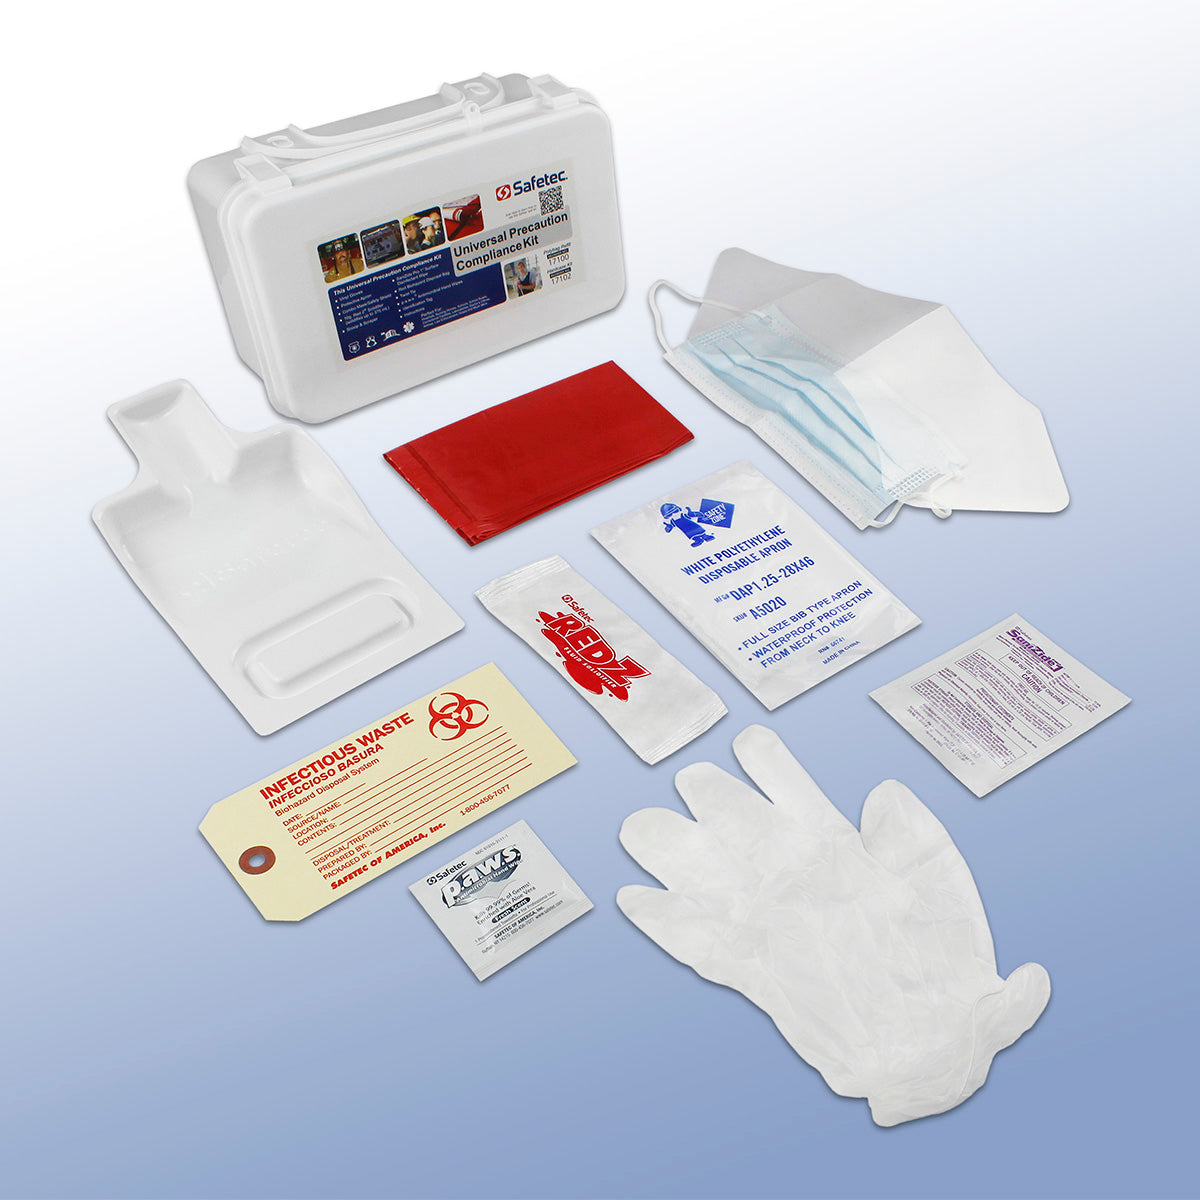 Universal Precaution Compliance Kit - Infection and Spill Control